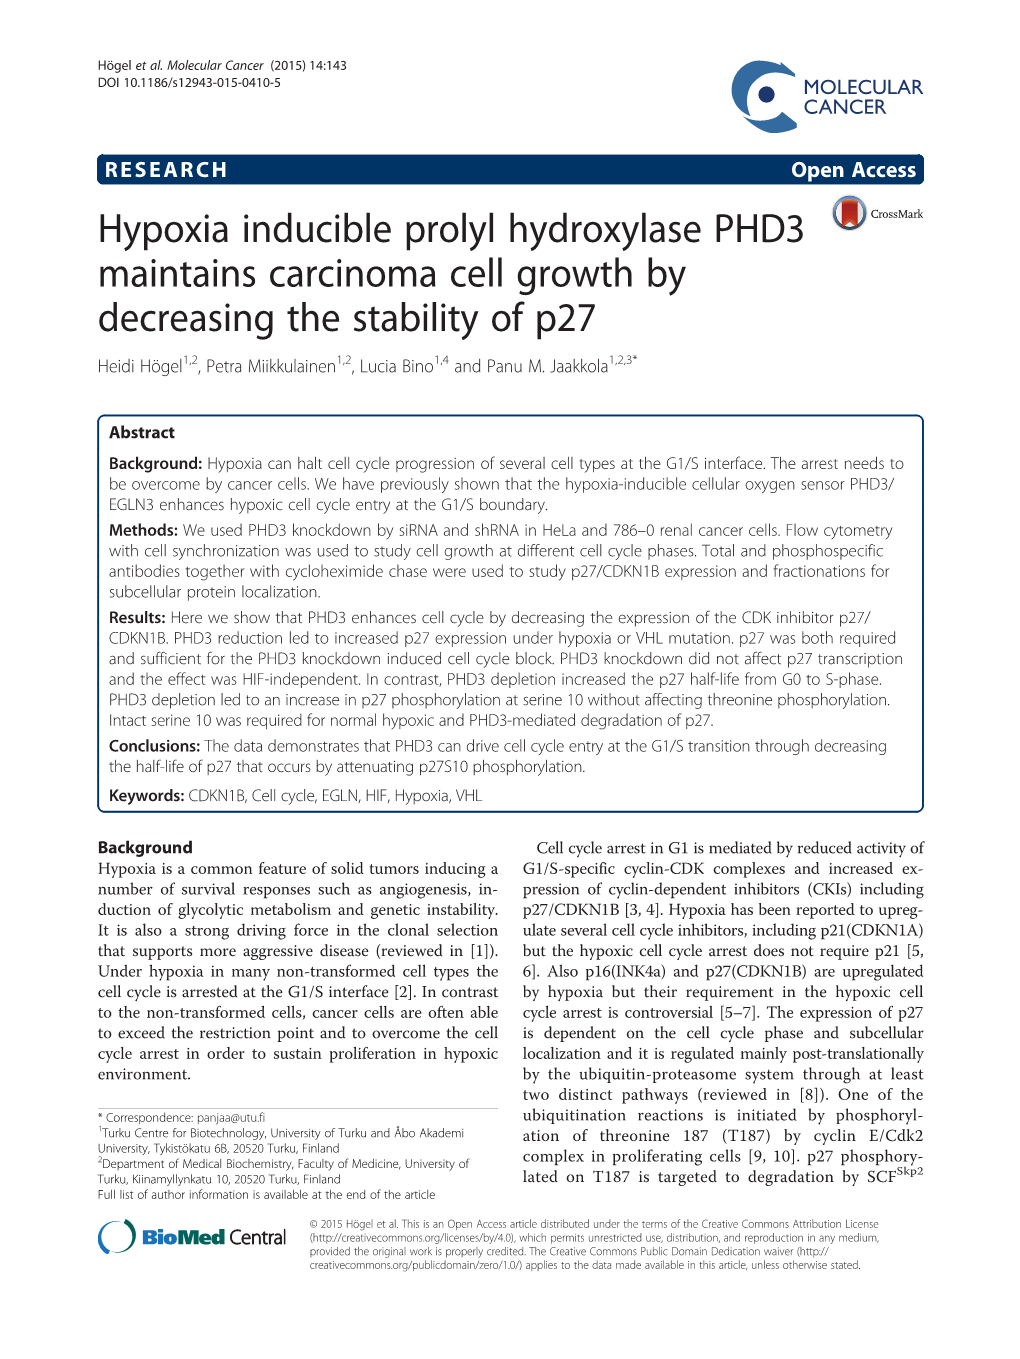 Hypoxia Inducible Prolyl Hydroxylase PHD3 Maintains Carcinoma Cell